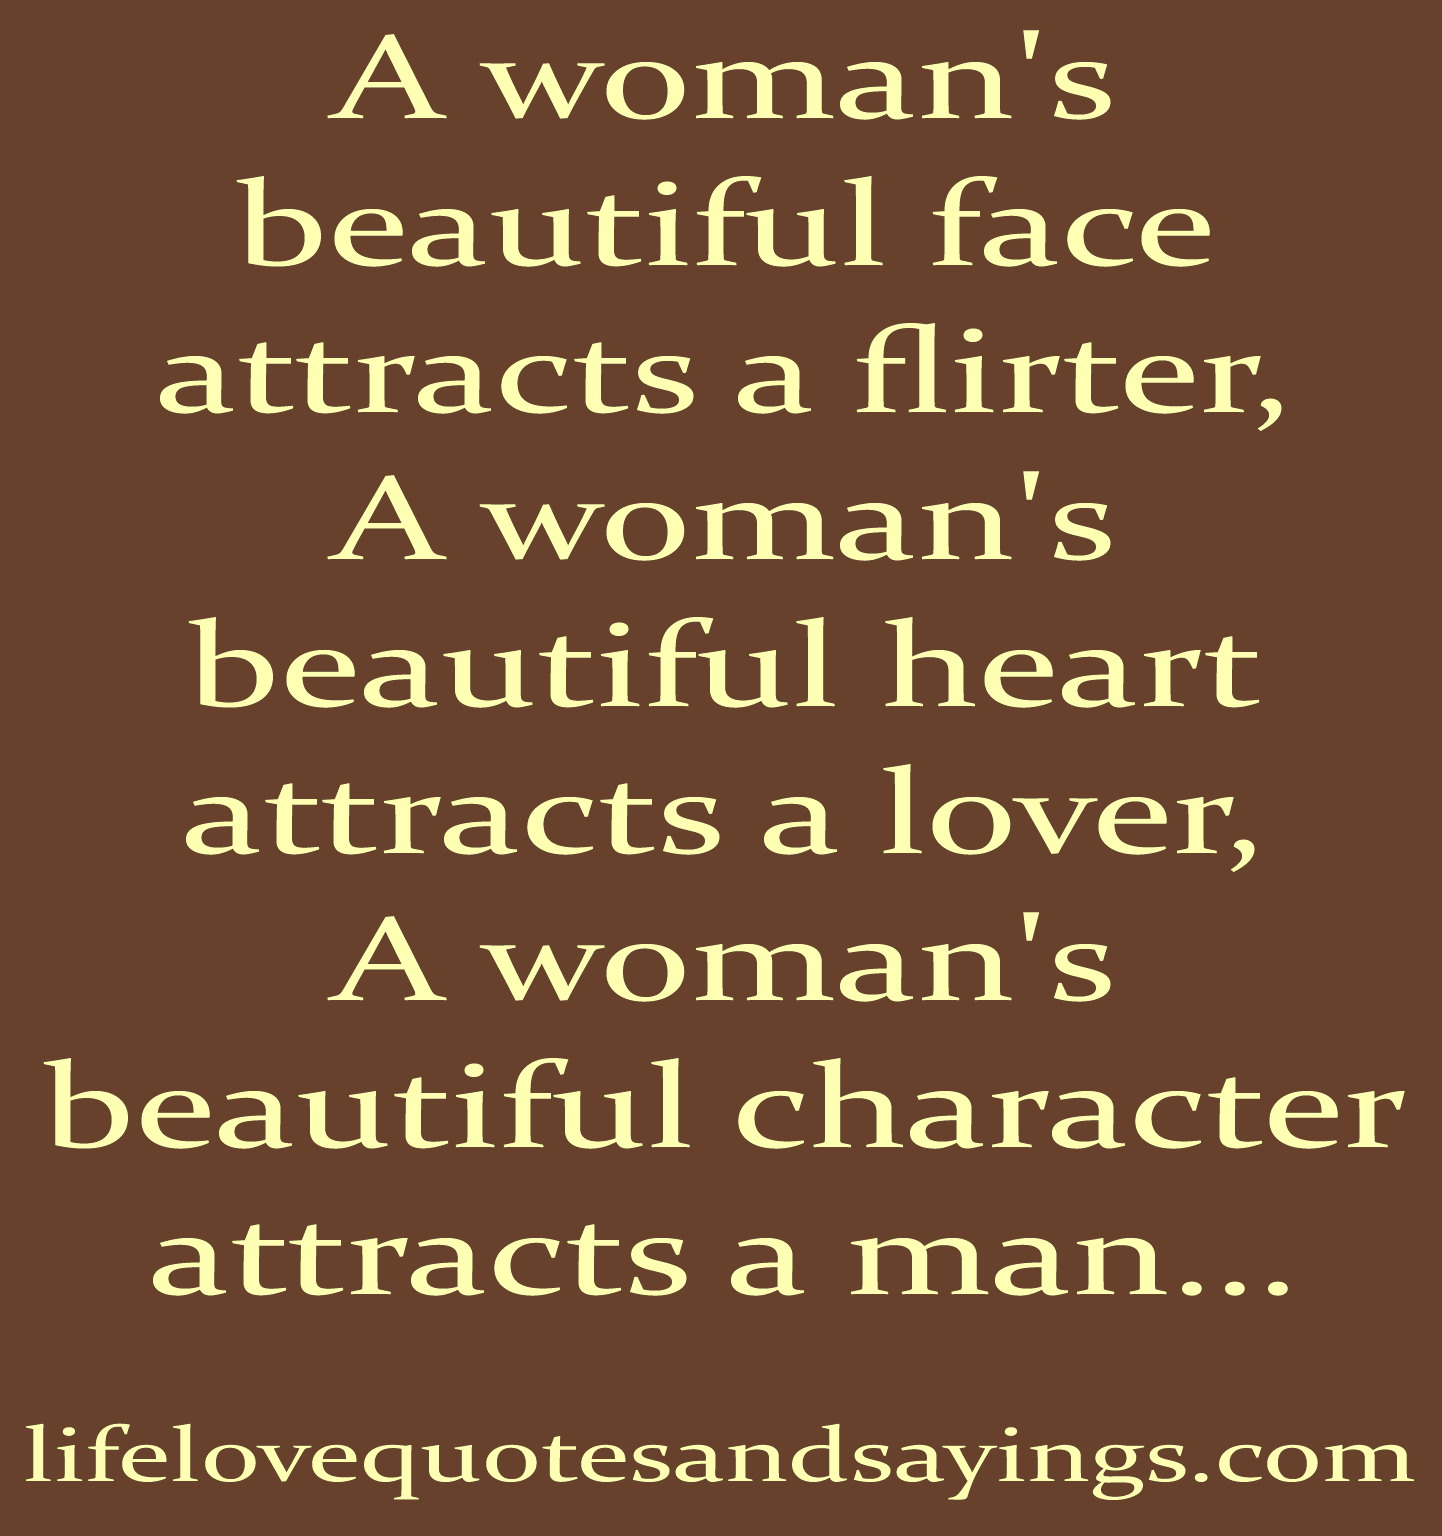 Beautiful Women Quotes And Sayings. QuotesGram